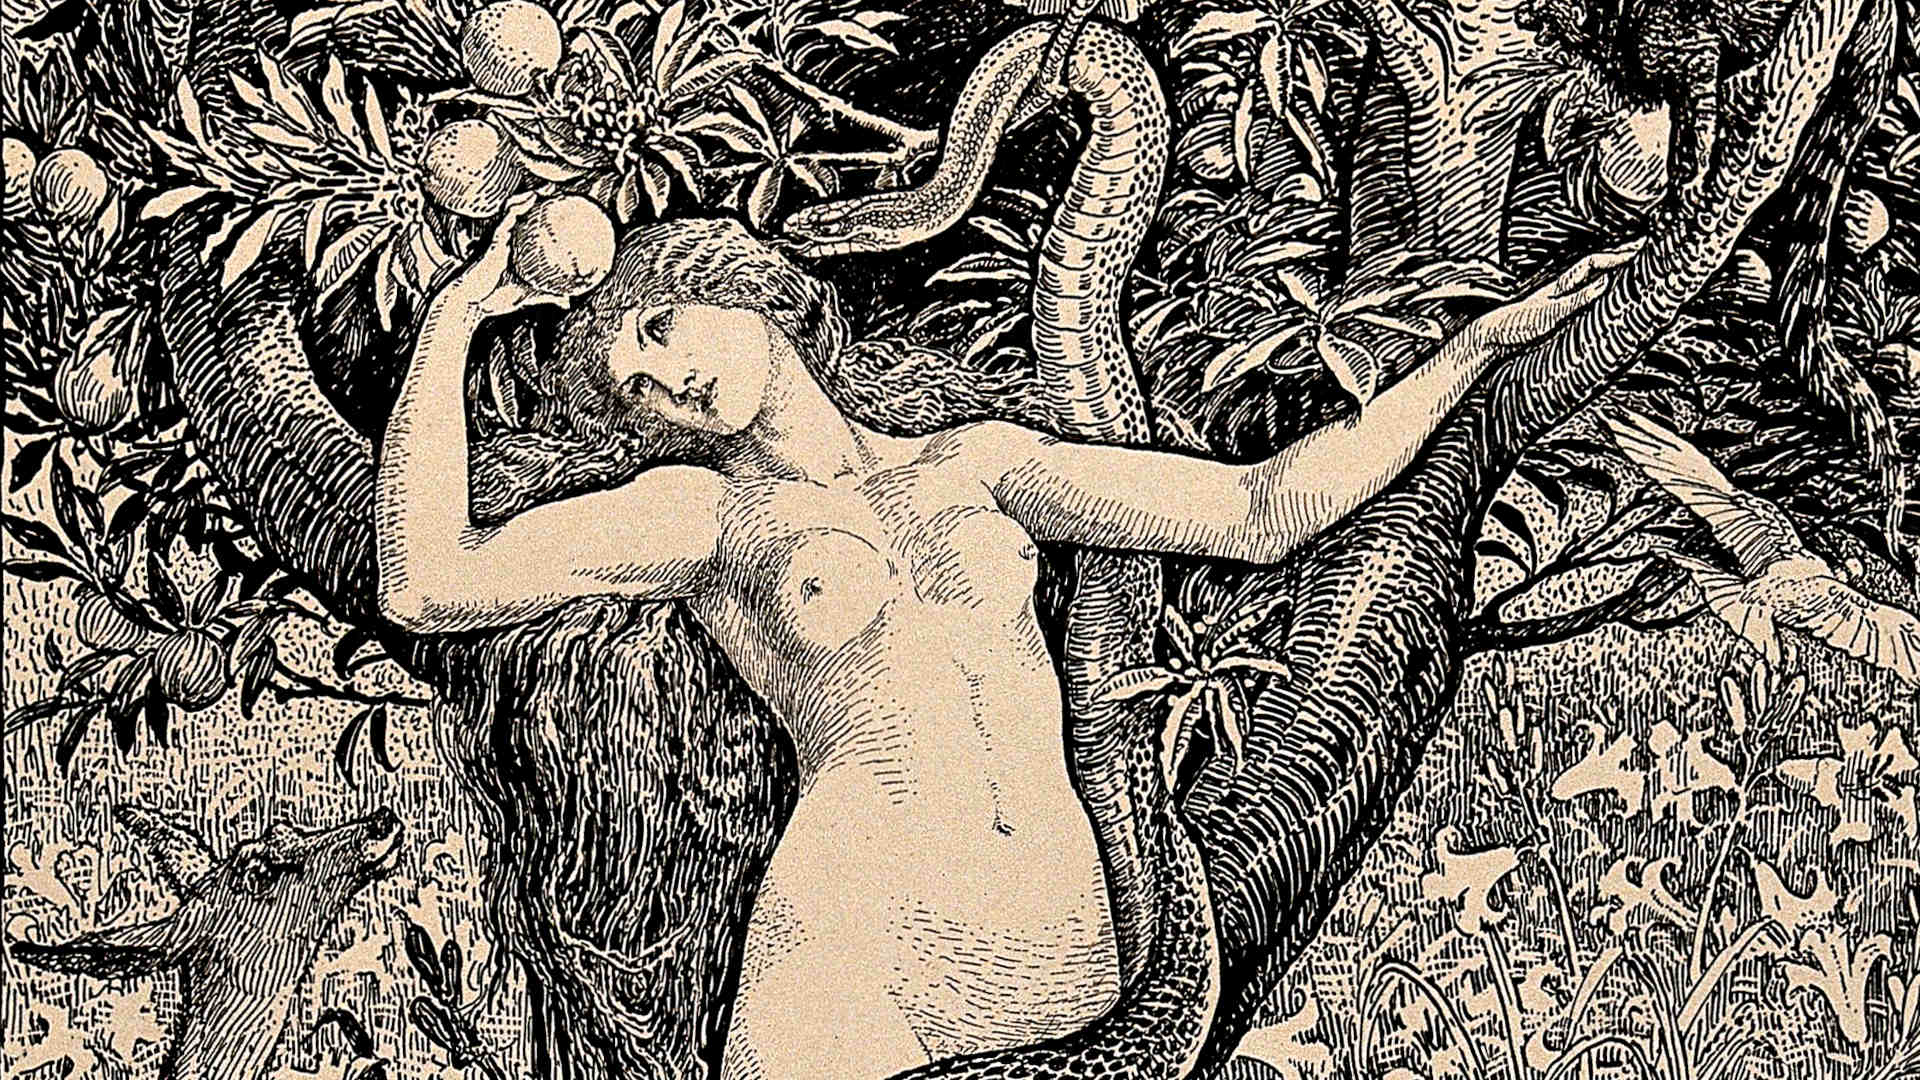 A depiction of Eve and the serpent.